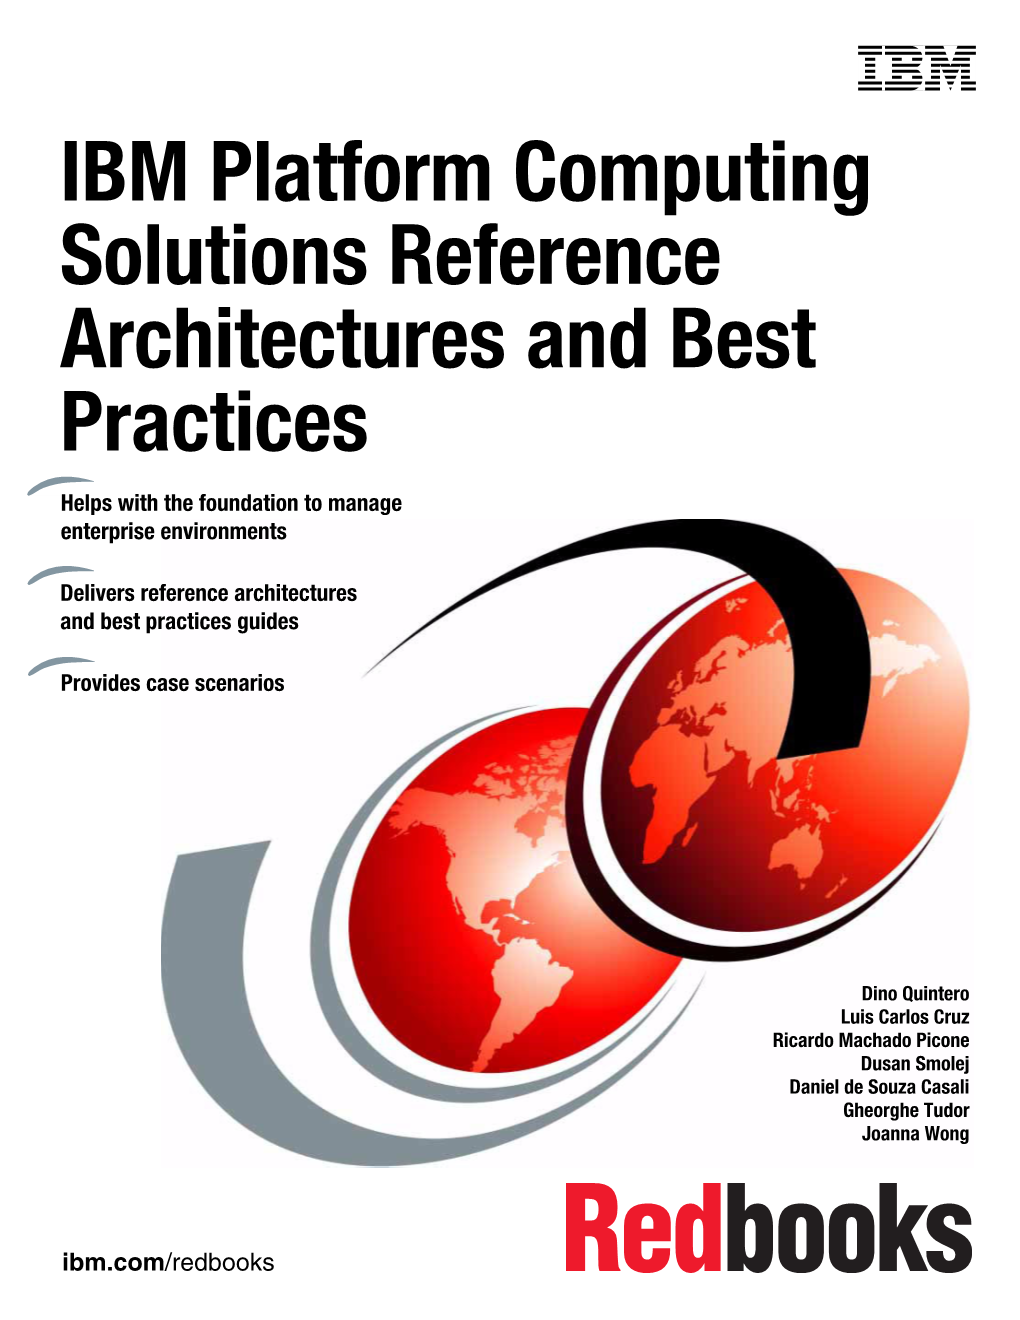 IBM Platform Computing Solutions Reference Architectures and Best Practices